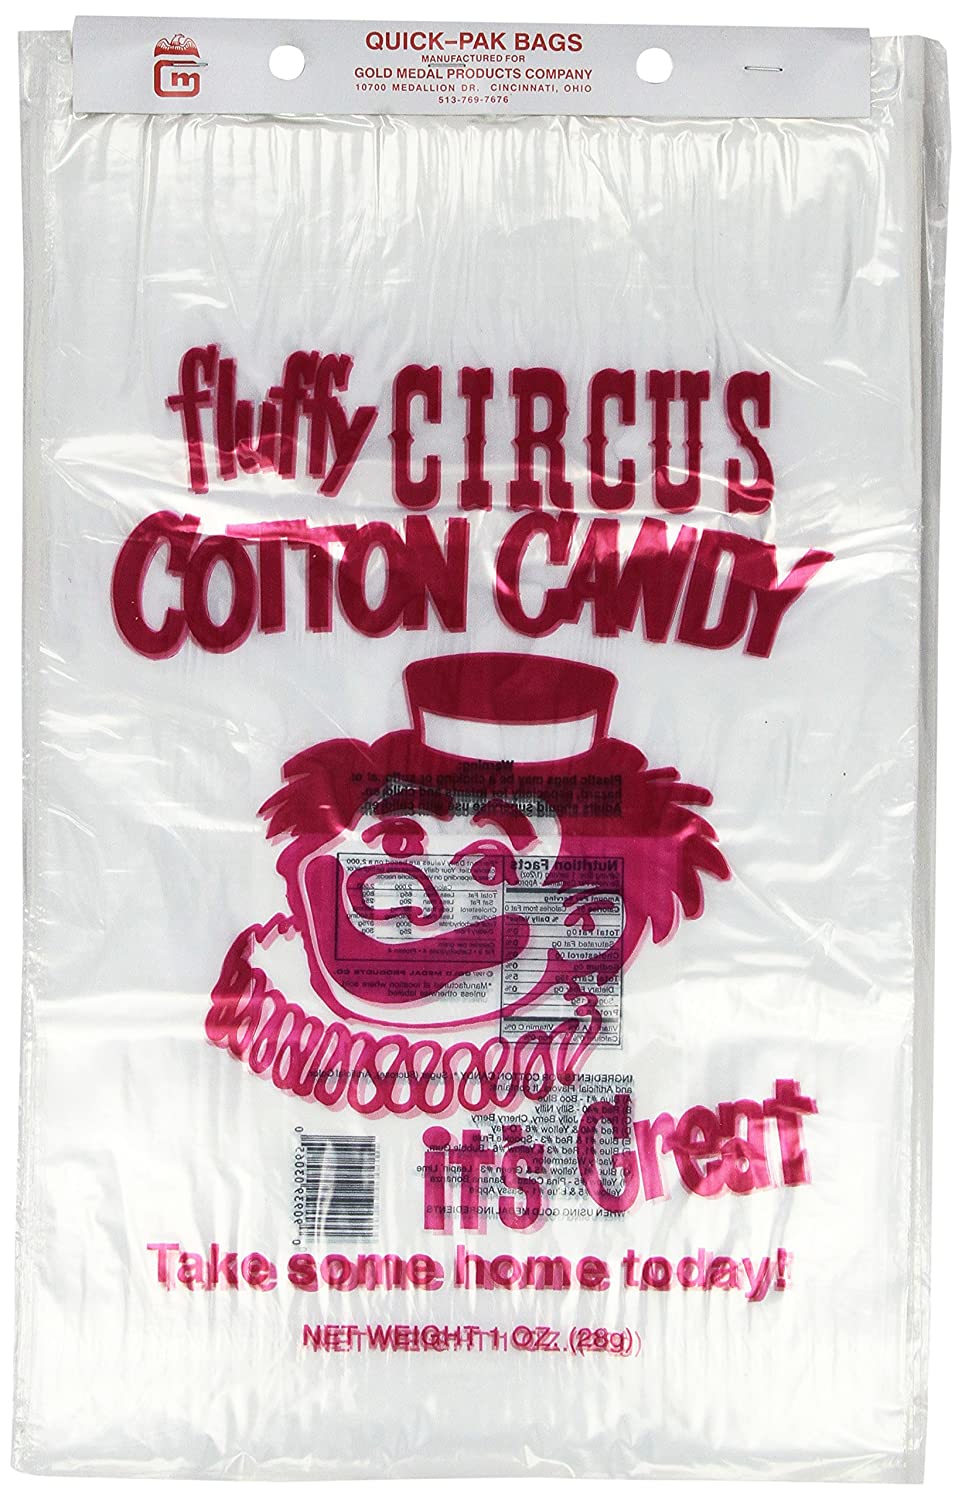 Snappy Popcorn Co. Inc Printed Quick Pack Cotton Candy Bags, 18 Pound (Pack of 10)